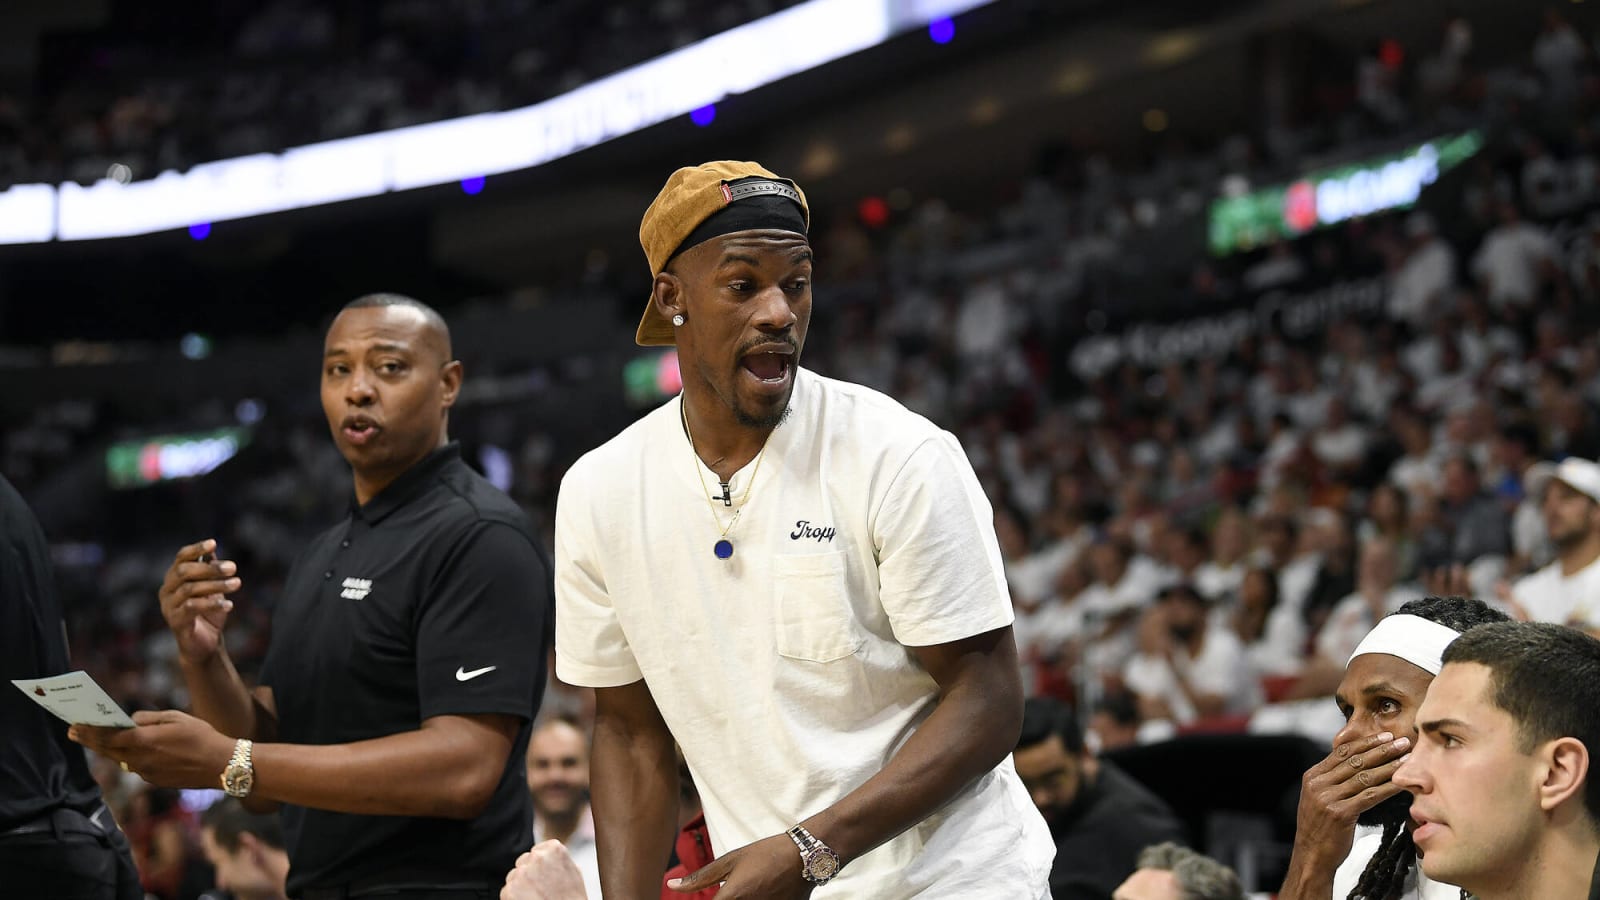 Jimmy Butler Claims Boston Celtics, New York Knicks Would Have Lost To Miami Heat If He Was Healthy